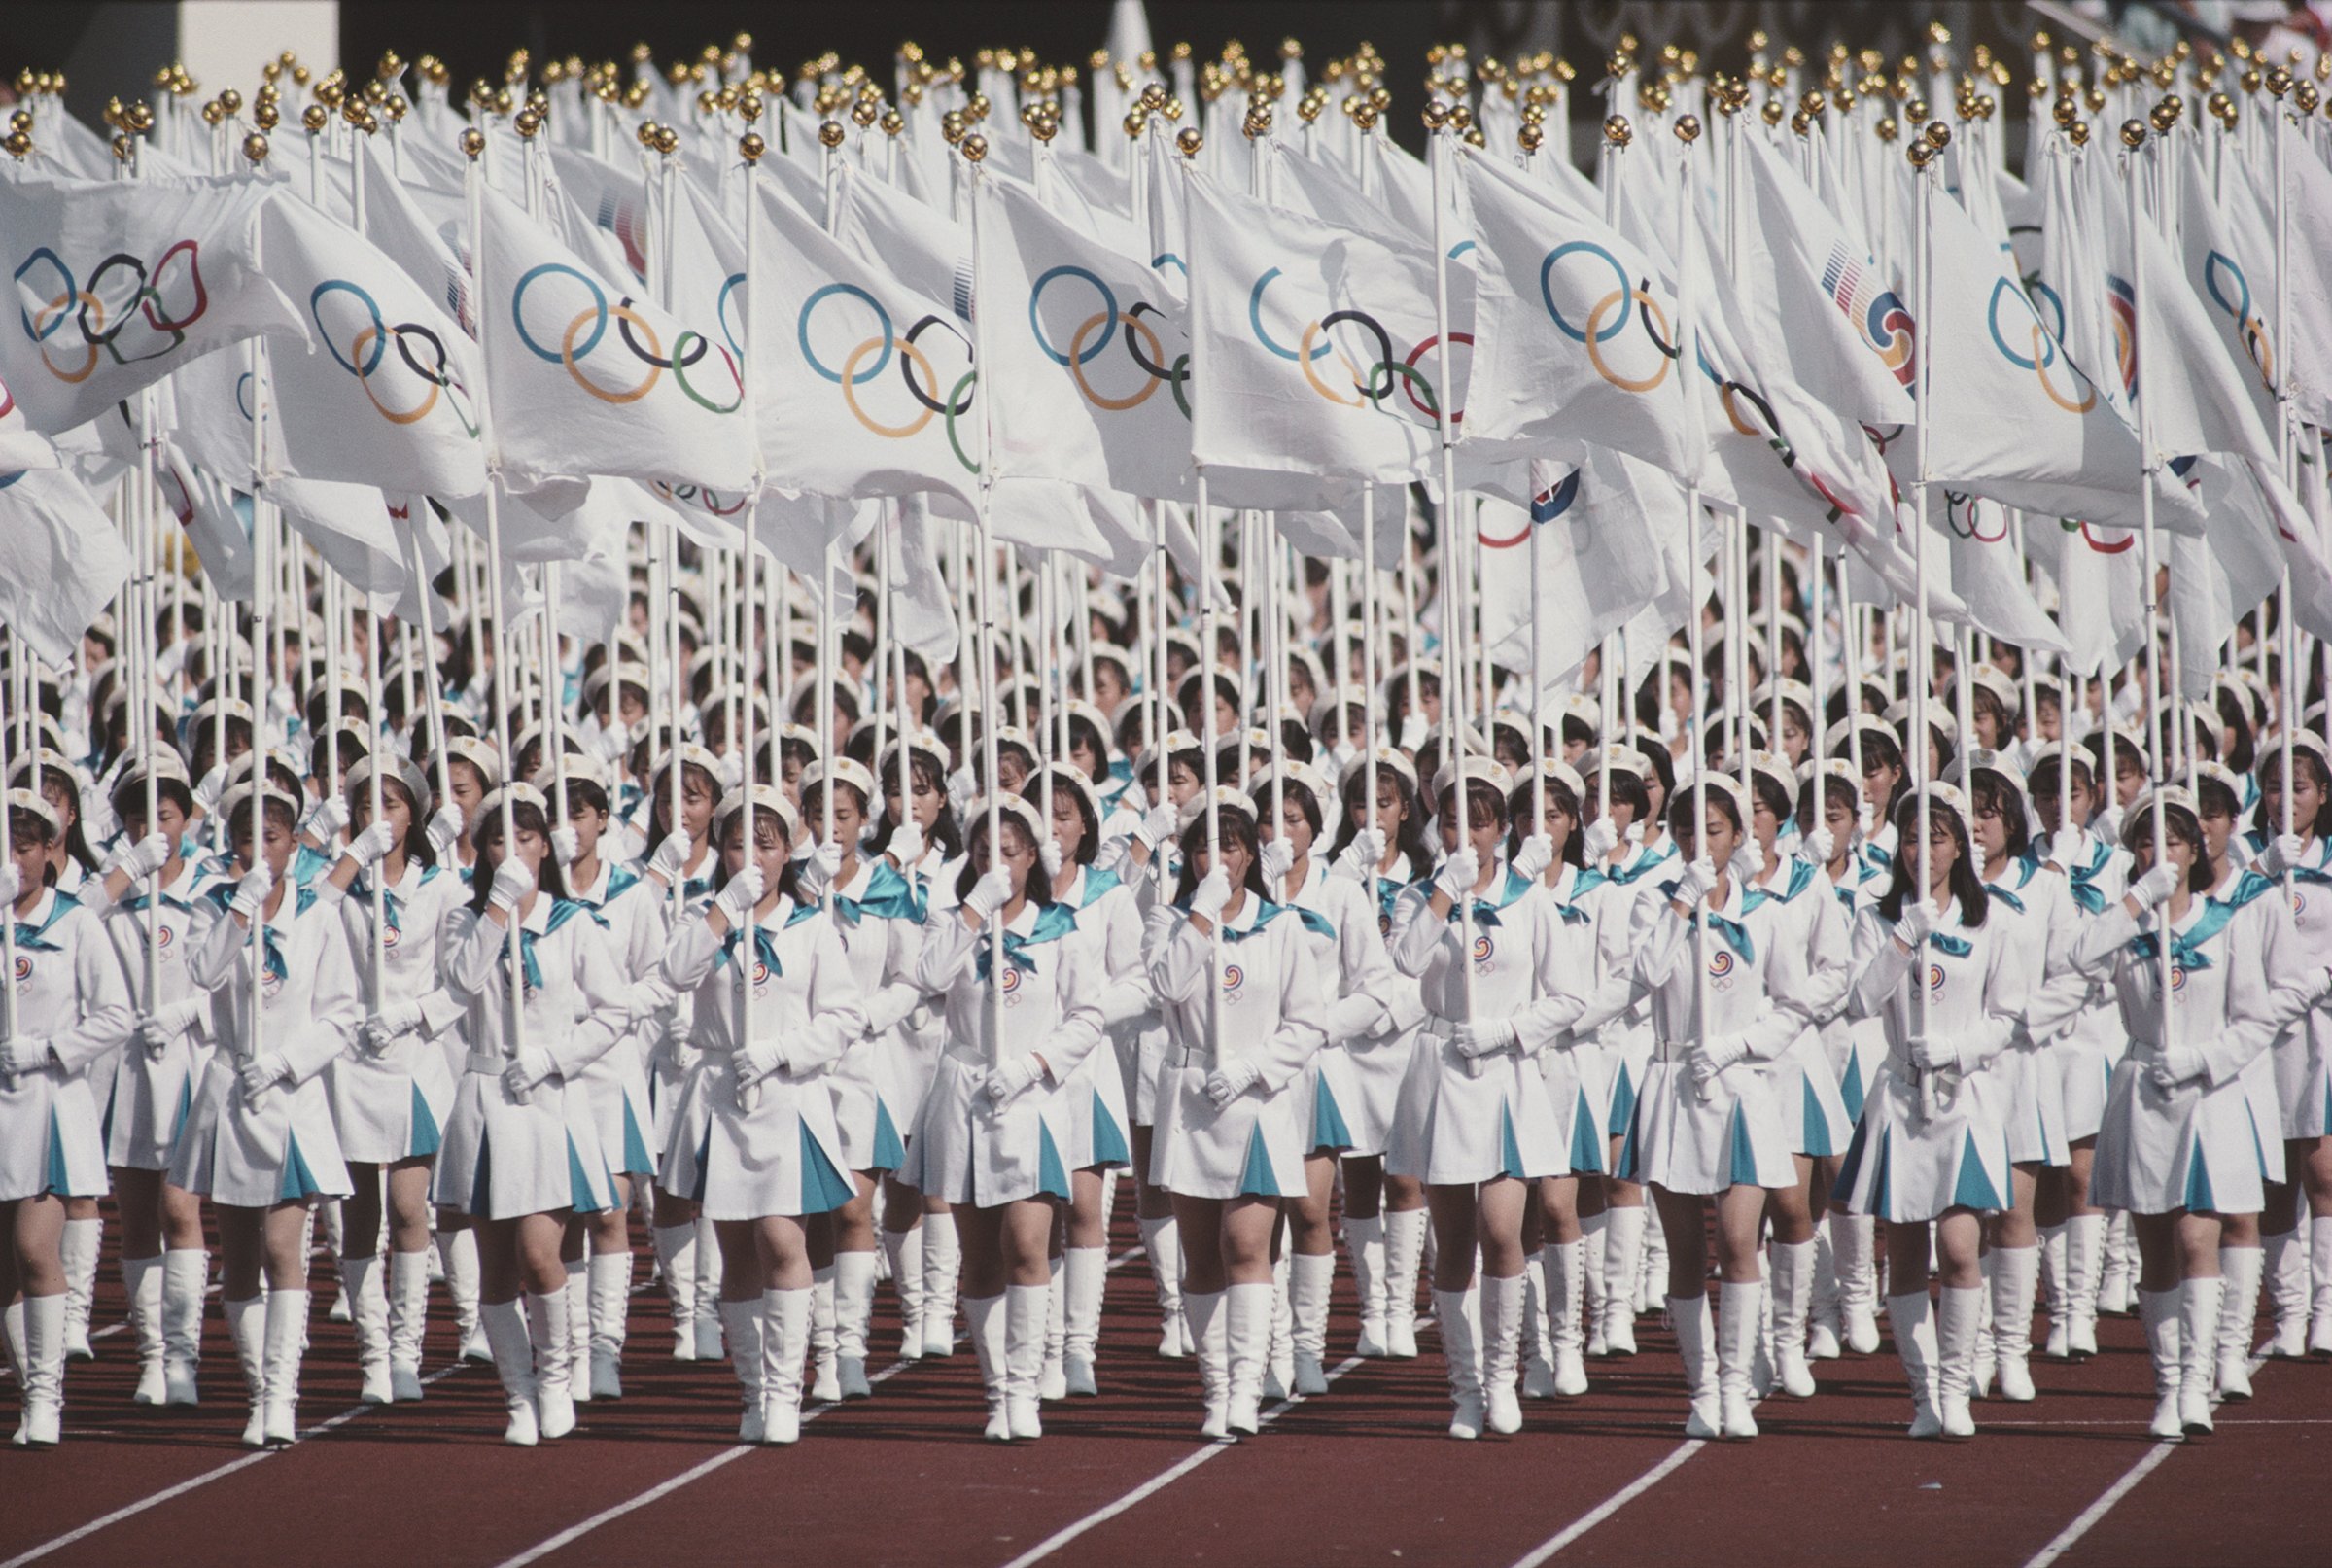 Olympic flag presented at the 1988 Olympics in Seoul